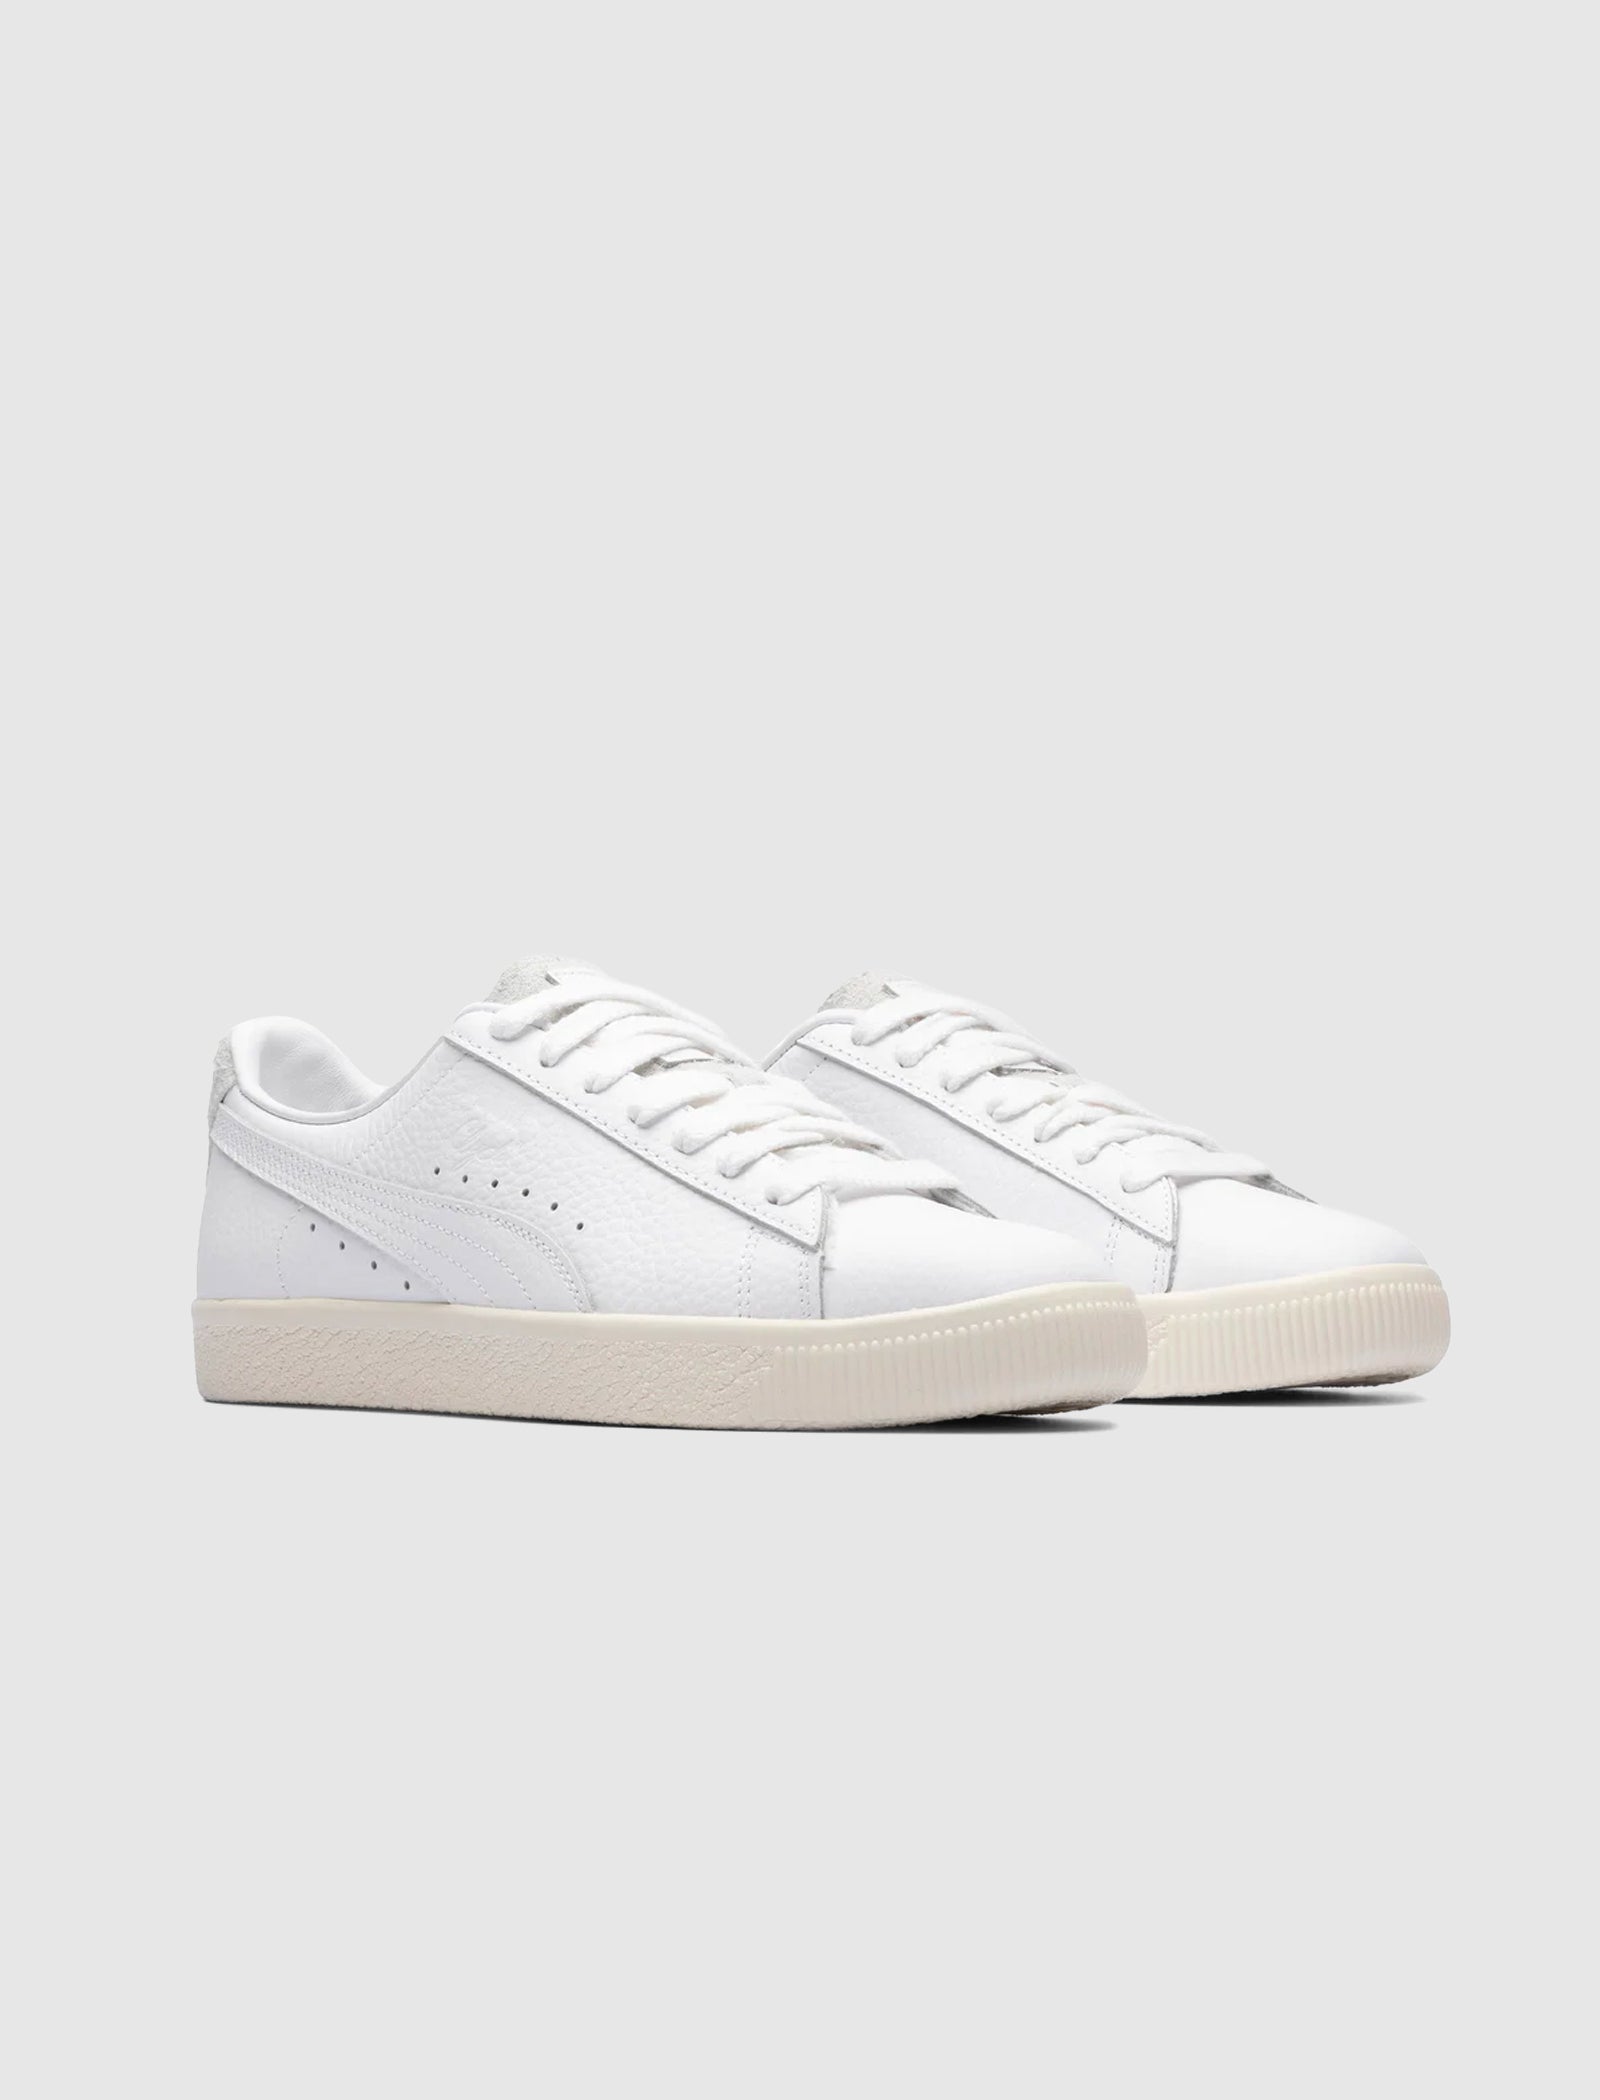 CLYDE PREMIUM "WHITE/FROSTED IVORY"